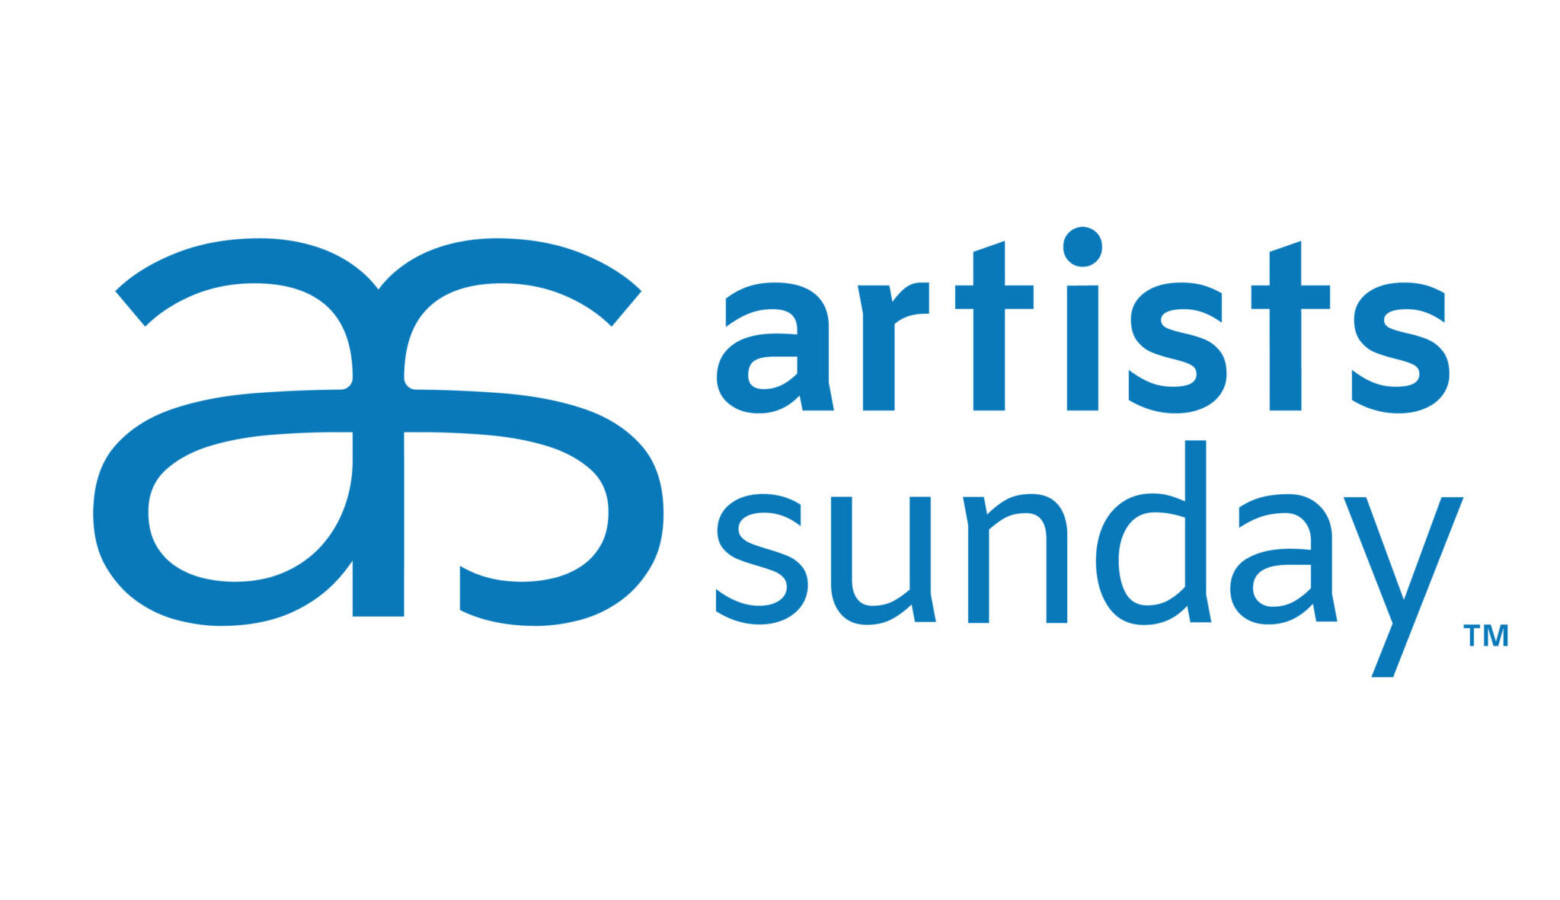 The first Artists Sunday event is scheduled to take place Sunday, Nov. 29. (Courtesy of Artists Sunday)